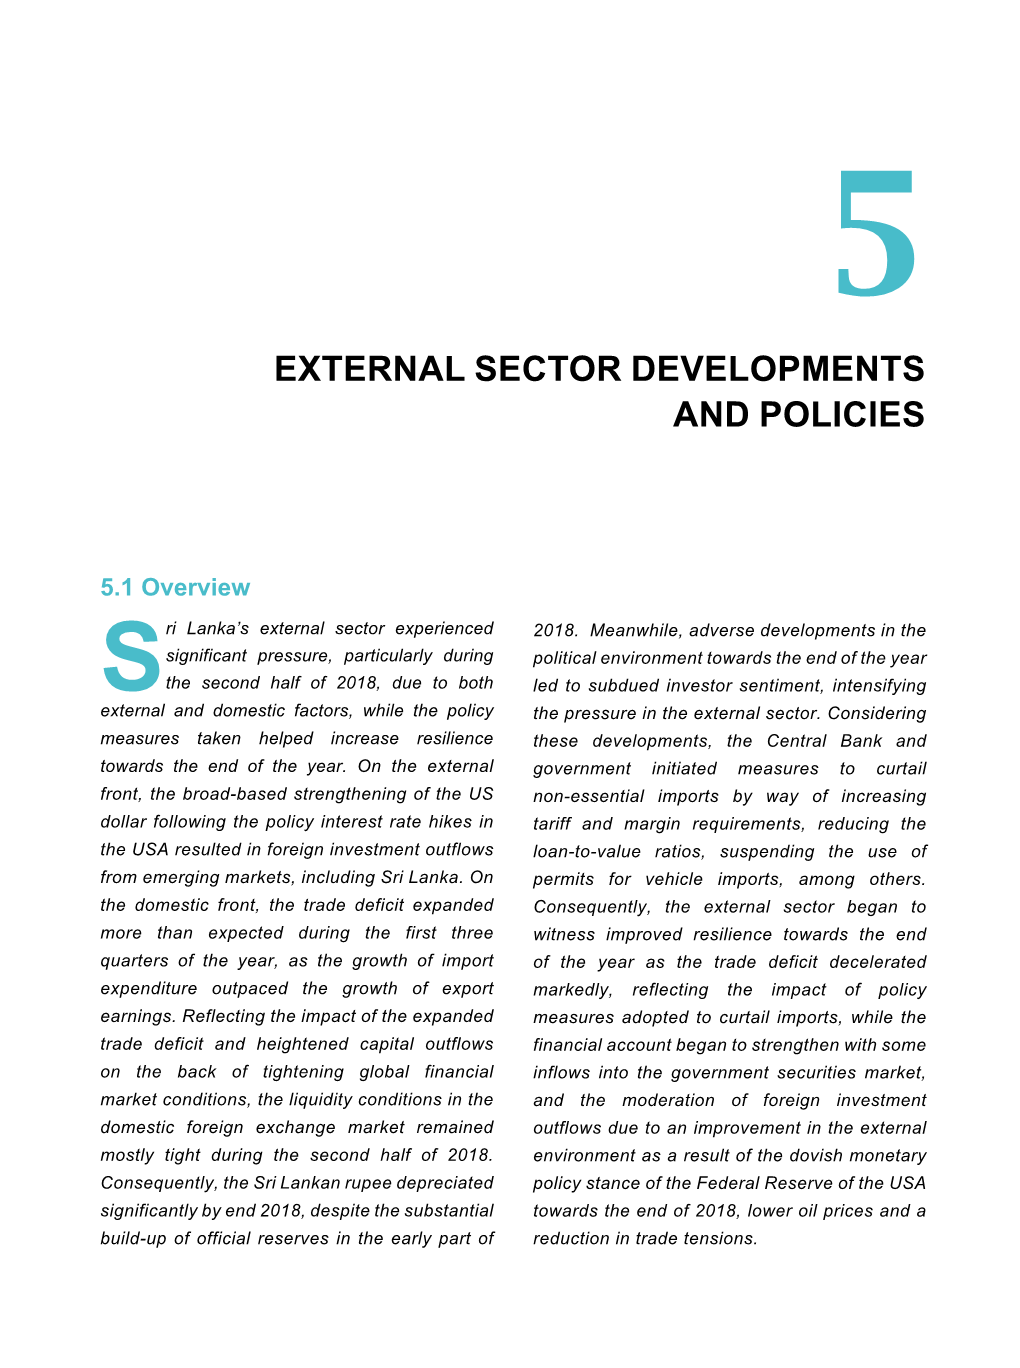 External Sector Developments and Policies